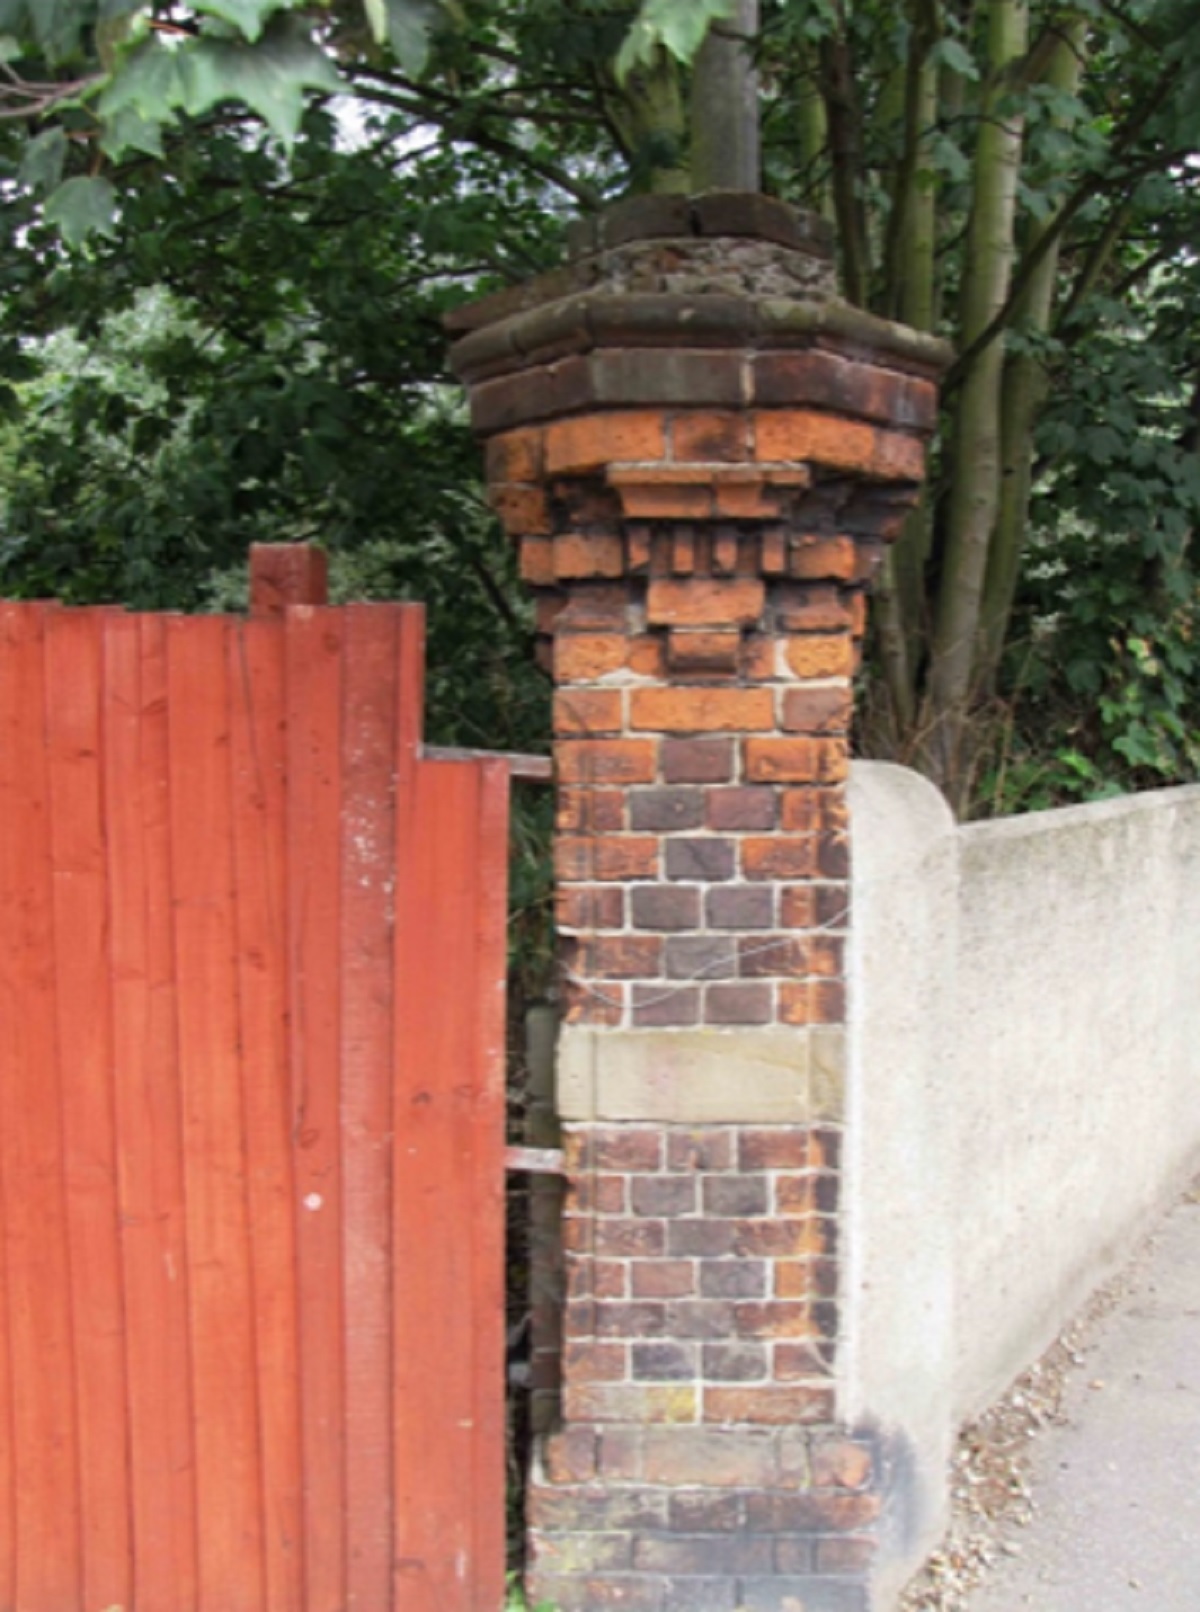 Nod to the past - the original gatepost that still remains on Old Heath Road